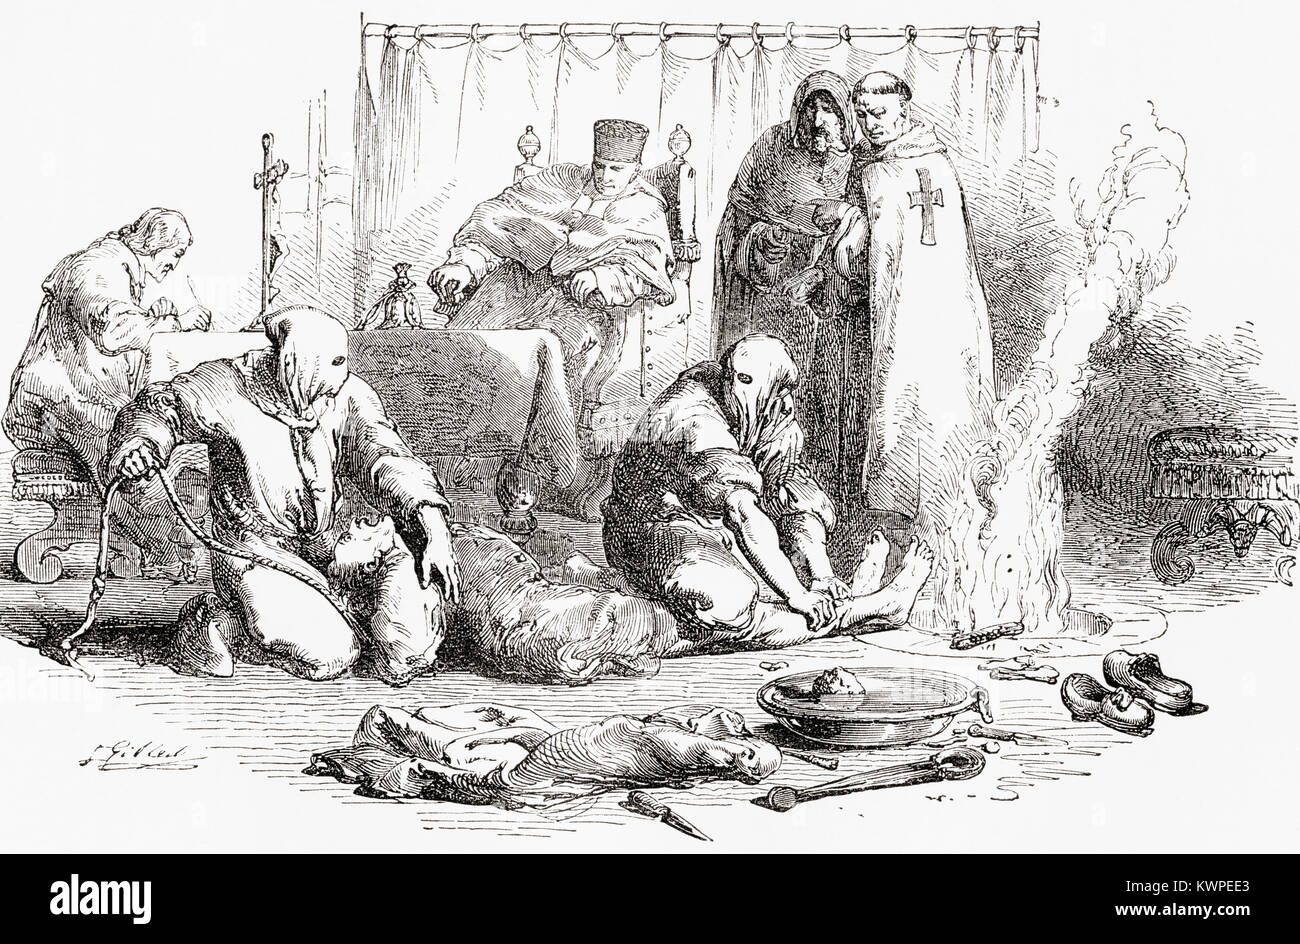 The Spanish Inquisition, torture by fire, 16th century.  From Ward and Lock's Illustrated History of the World, published c.1882. Stock Photo